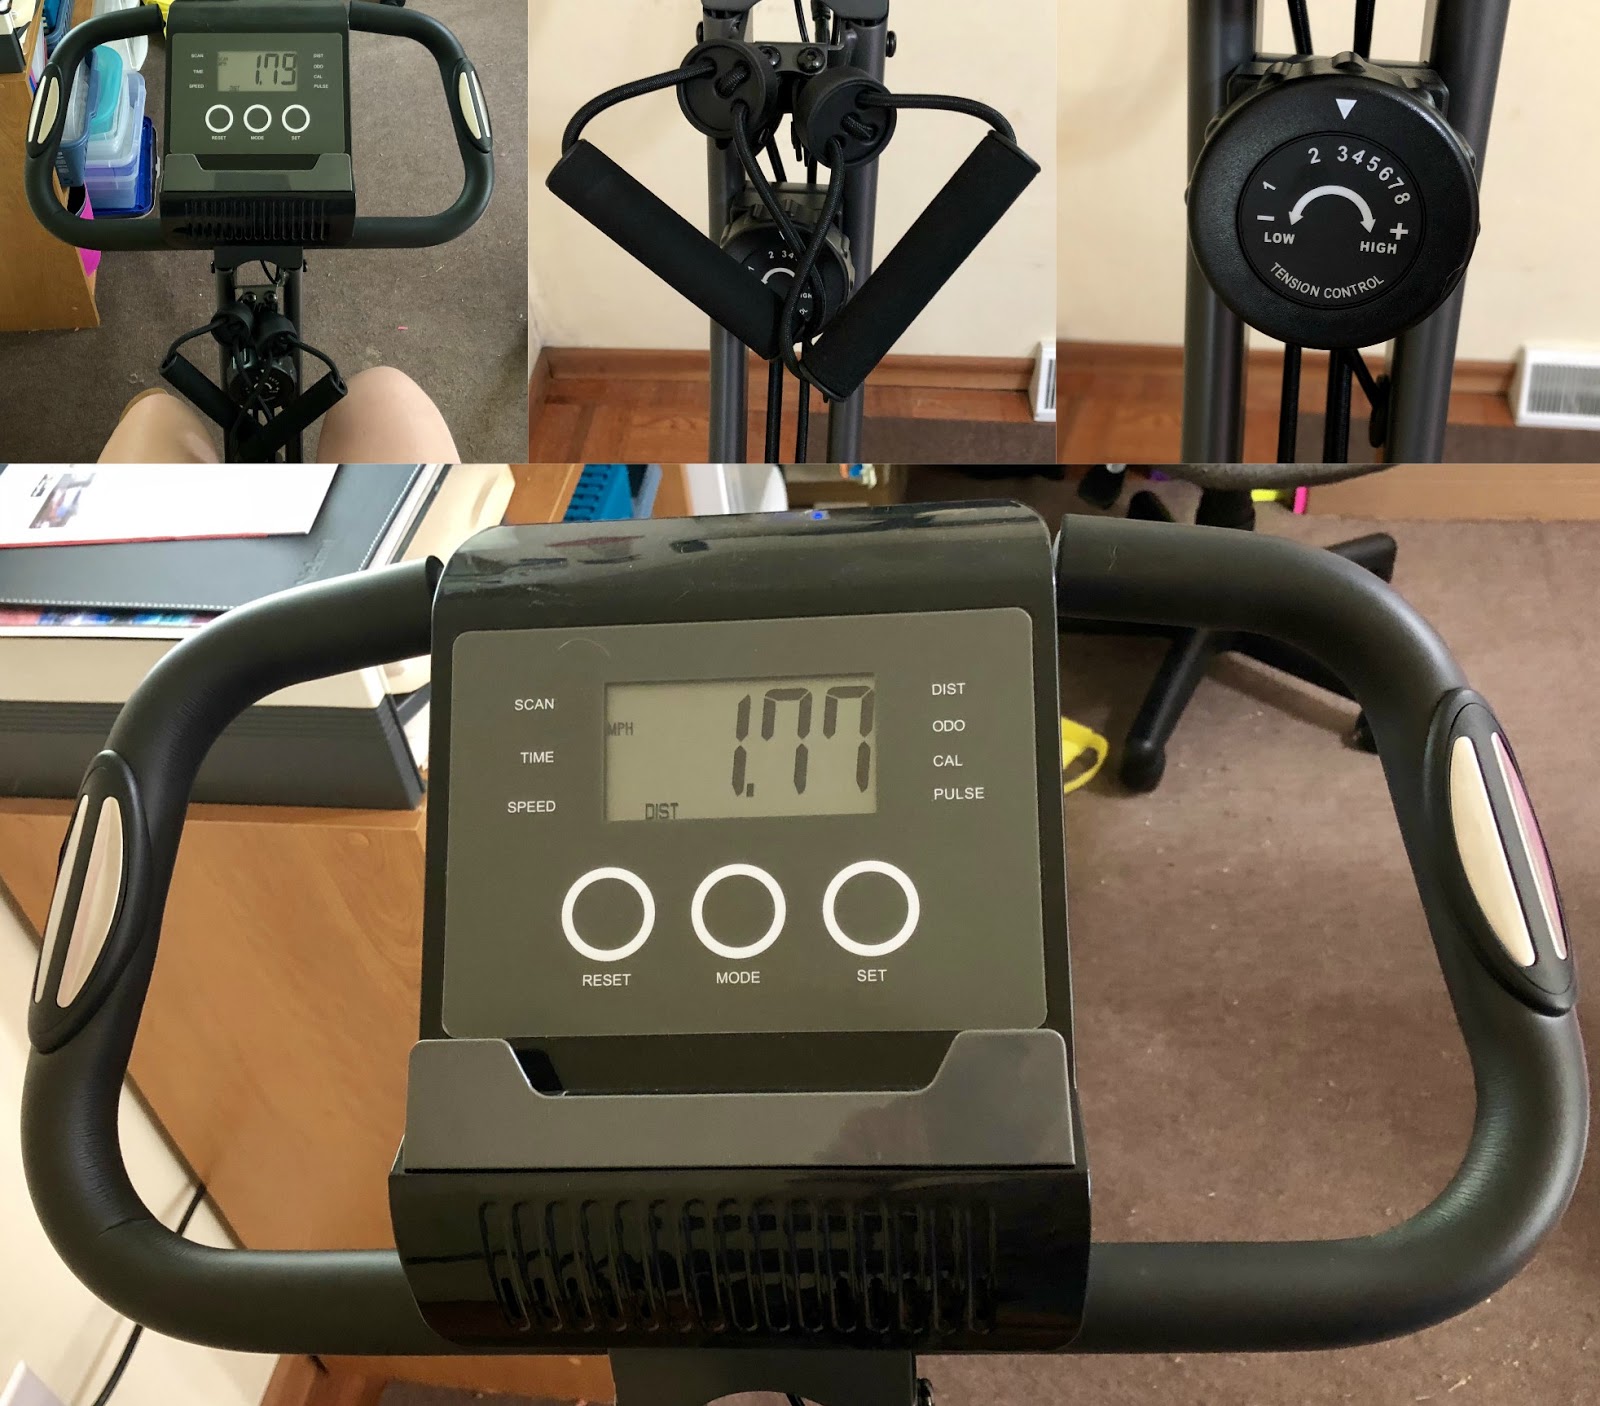 Stacy Talks & Reviews: Get moving with the Fitnation - Flex Bike Ultra